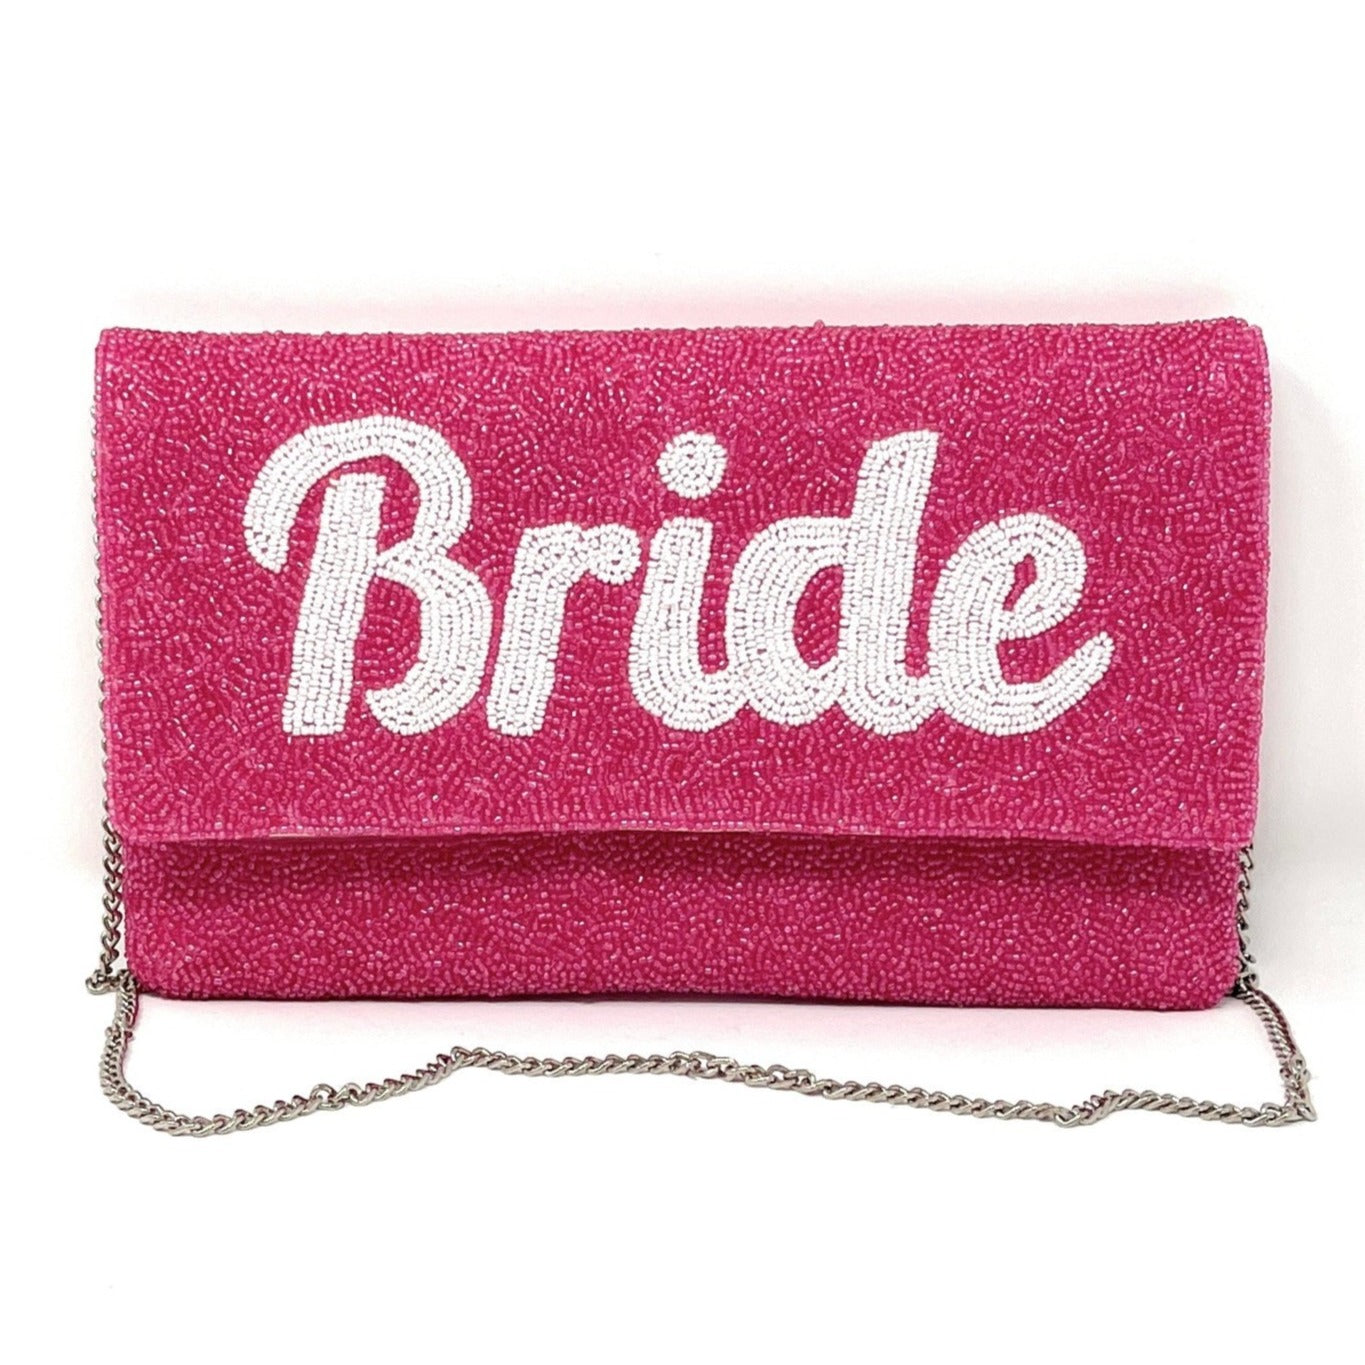 Bridal Clutches: Over 614 Royalty-Free Licensable Stock Photos |  Shutterstock